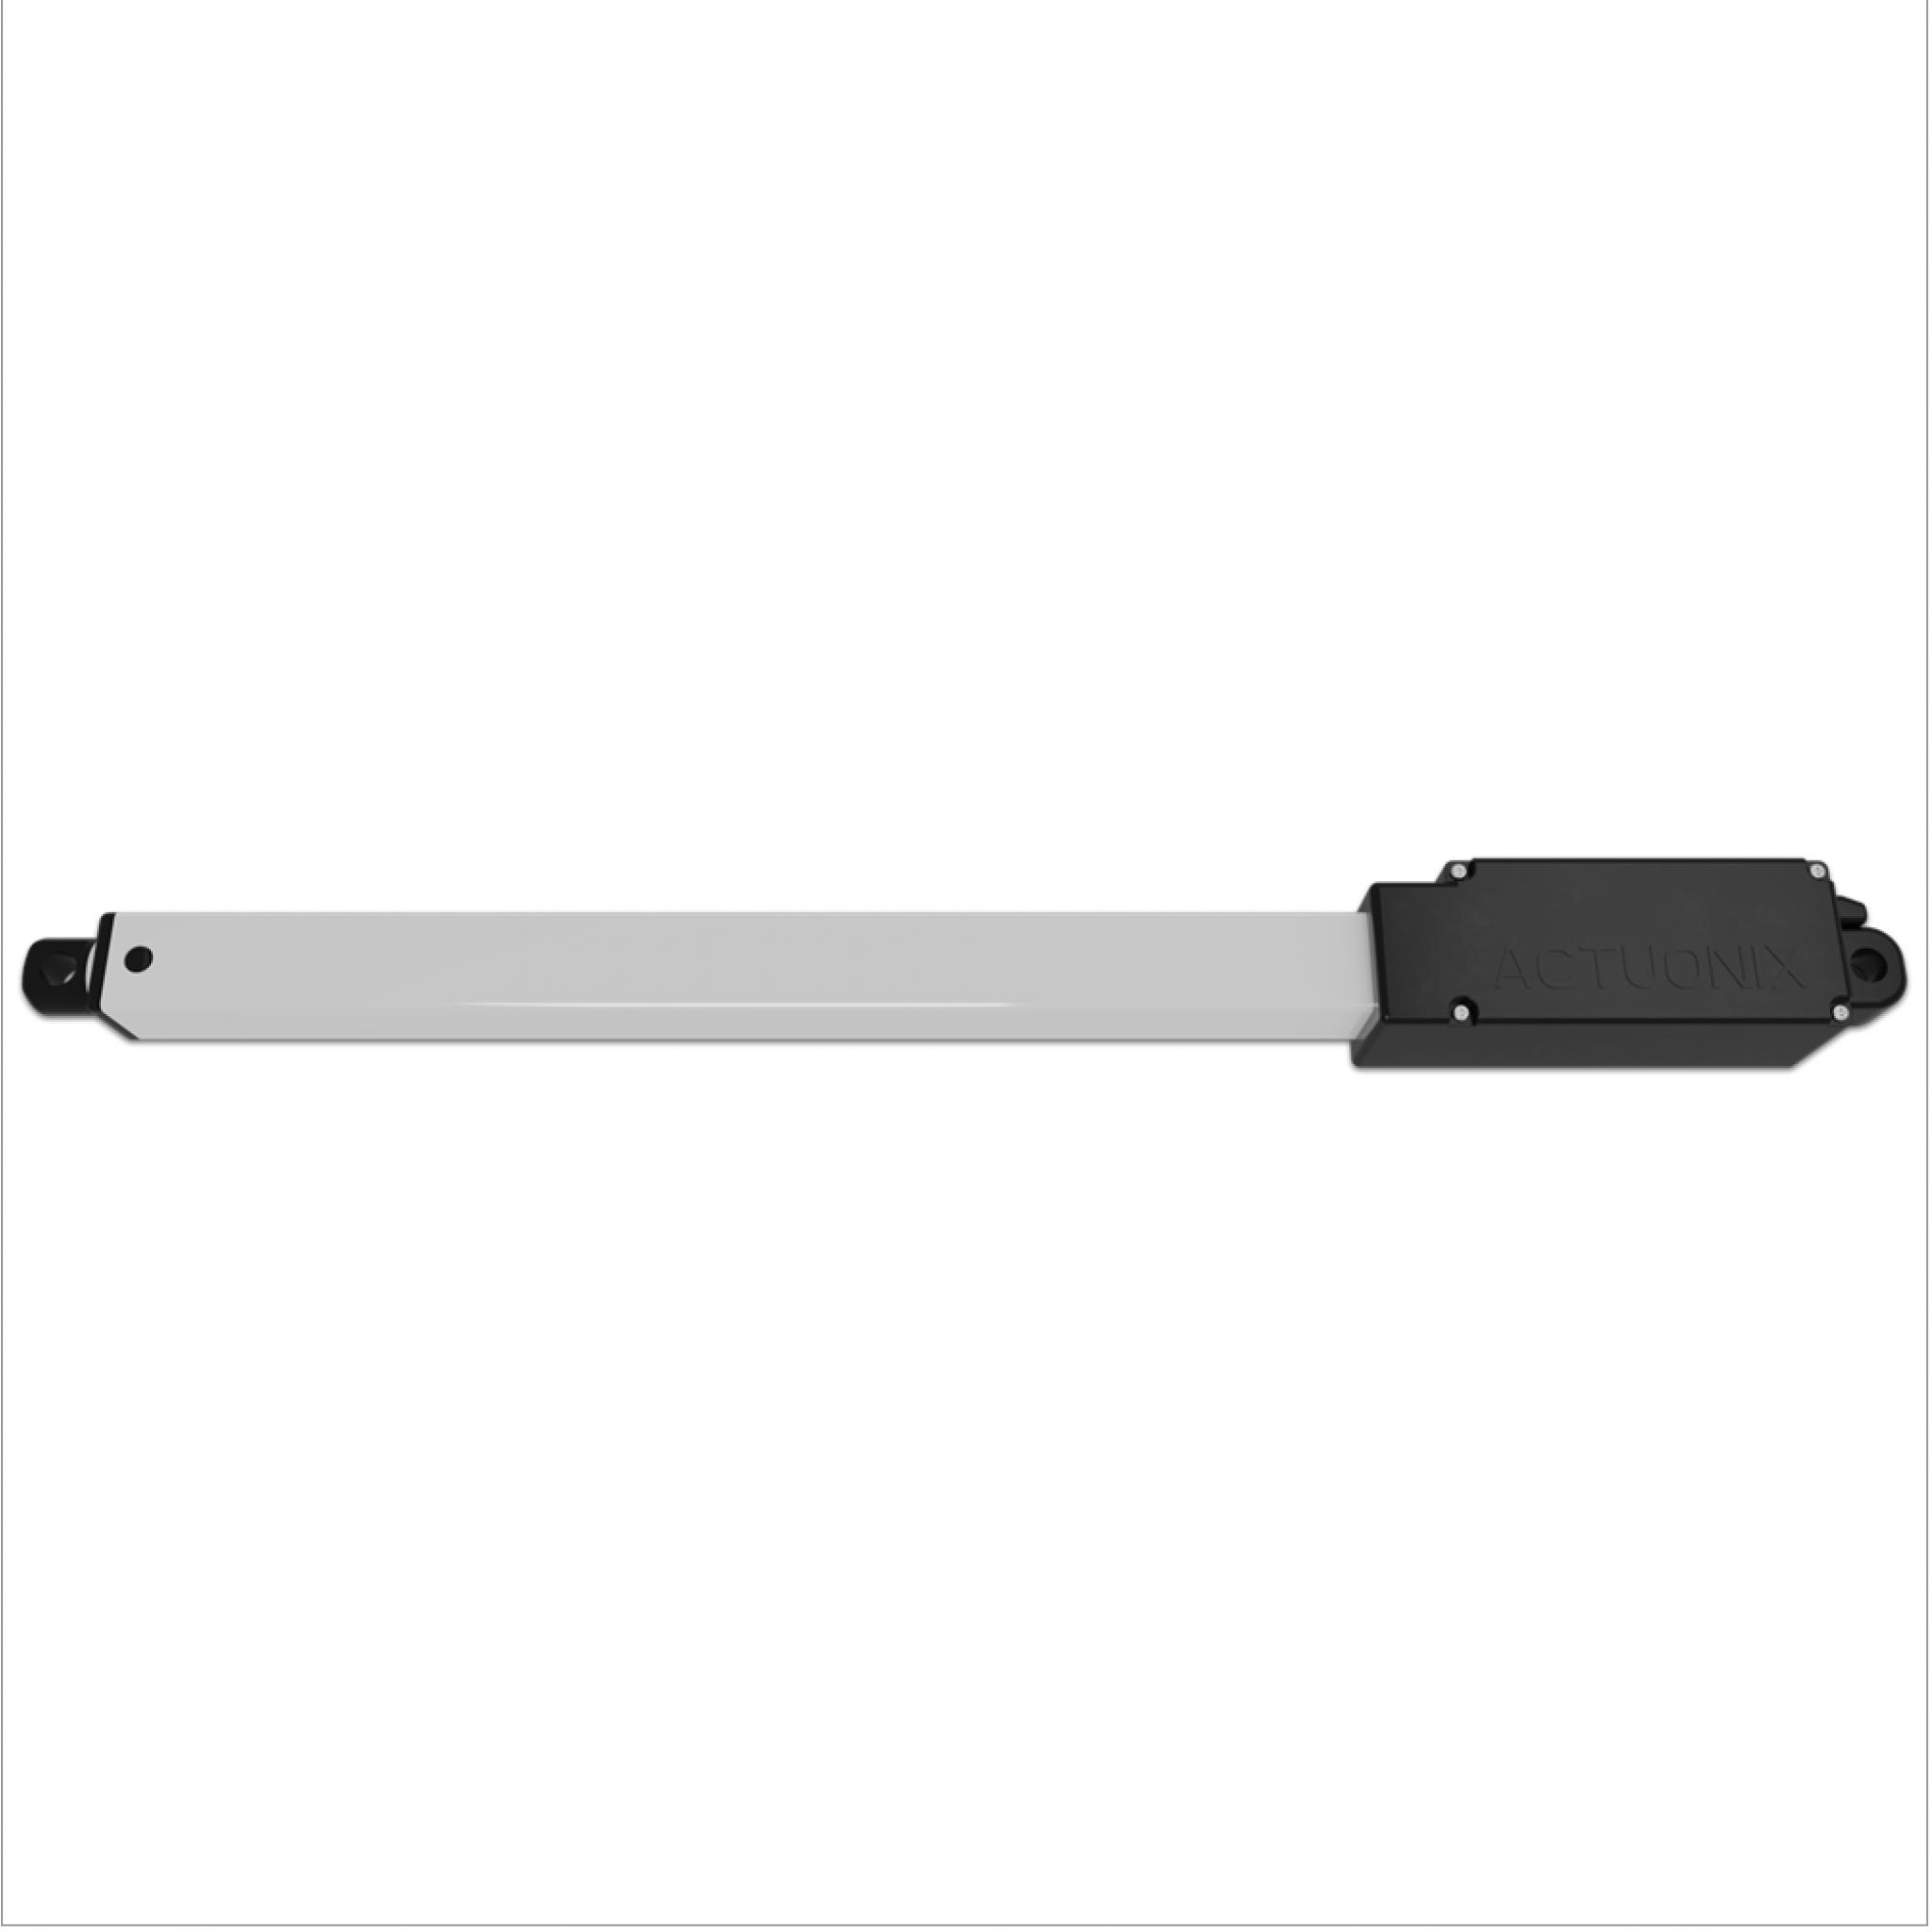 L16-P Miniature Linear Actuator with Feedback